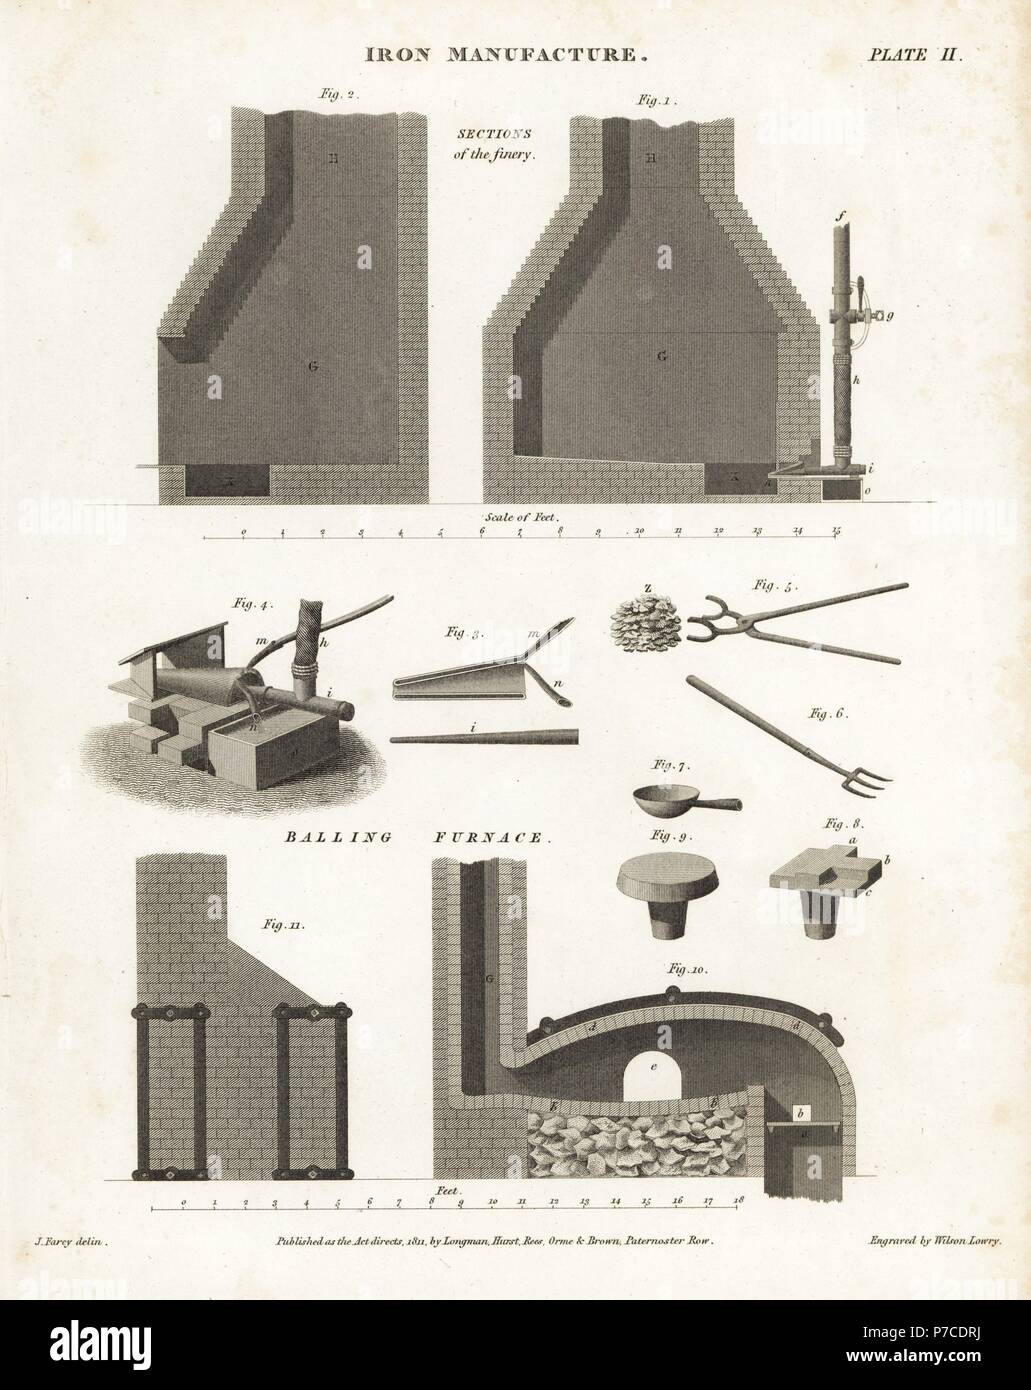 Sections and elevations of balling furnace and finery used in iron manufacture, along with tools and pump. Copperplate engraving by Wilson Lowry after a drawing by John Farey from Abraham Rees' Cyclopedia or Universal Dictionary of Arts, Sciences and Literature, Longman, Hurst, Rees, Orme and Brown, London, 1810. Stock Photo